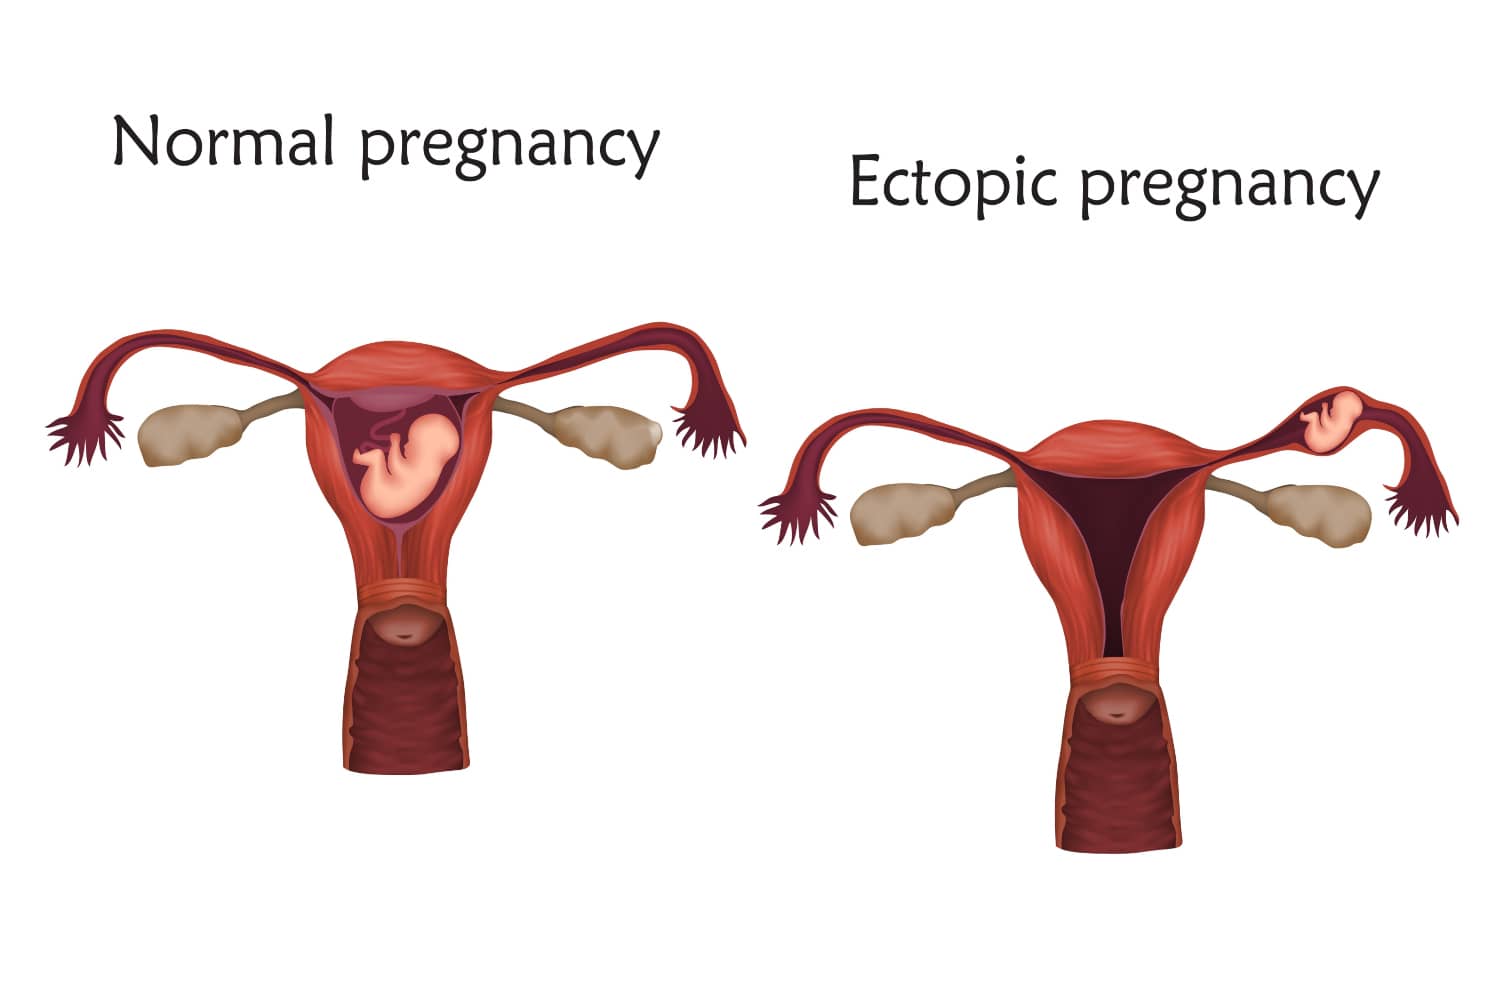 What Are the Probable Causes of Ectopic Pregnancy